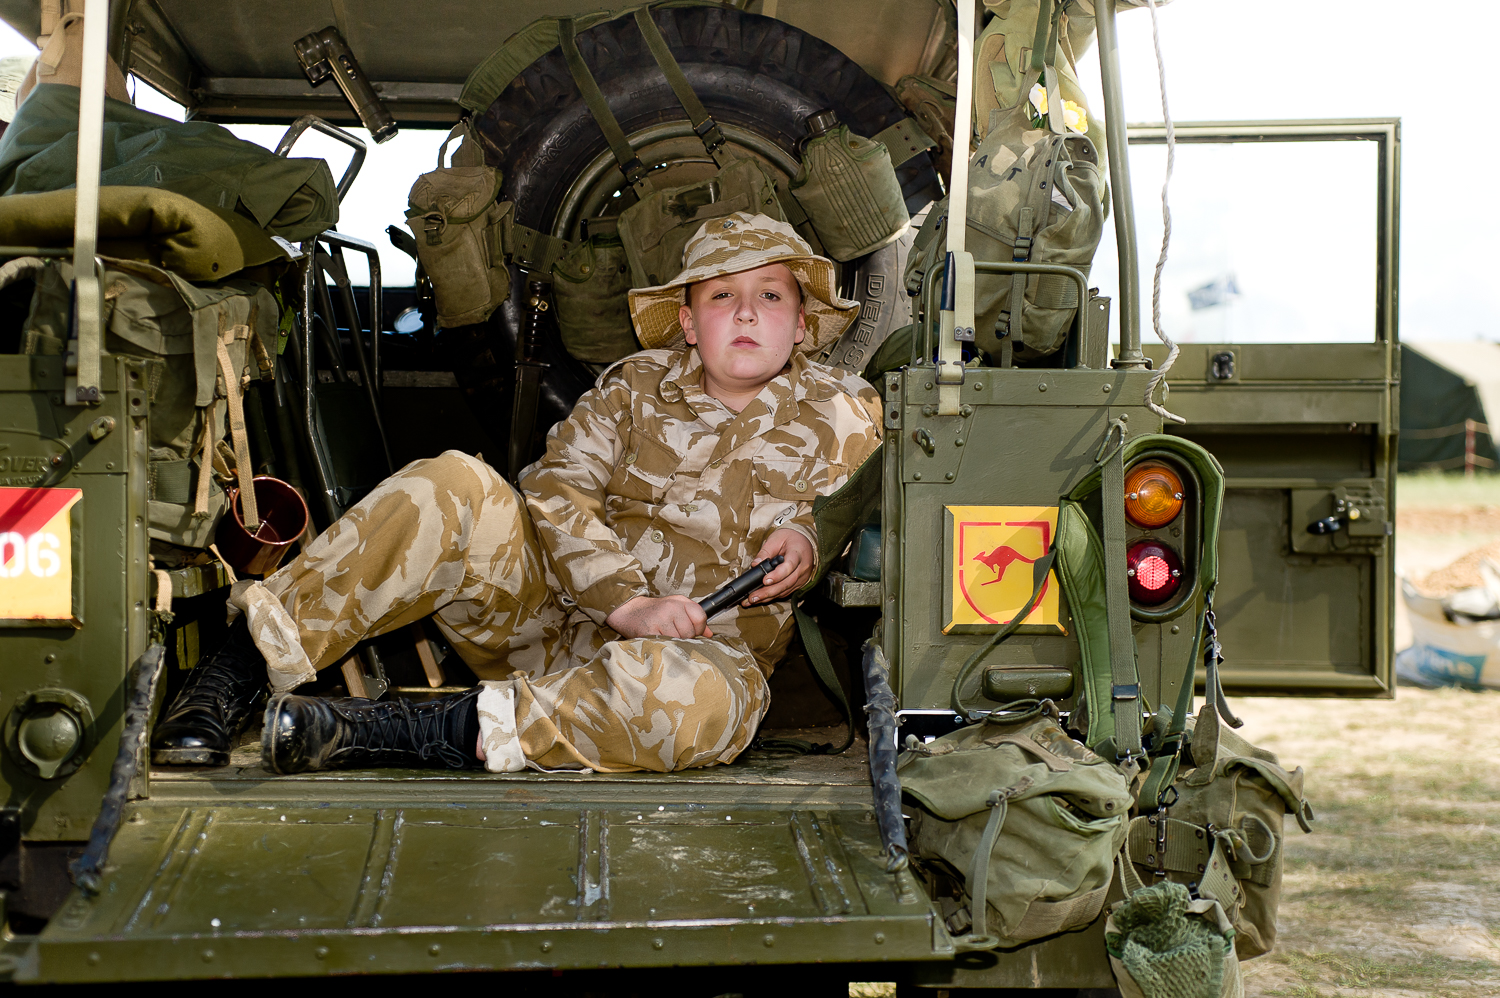  Boy in armoured vehicle, War and Peace show, Kent 